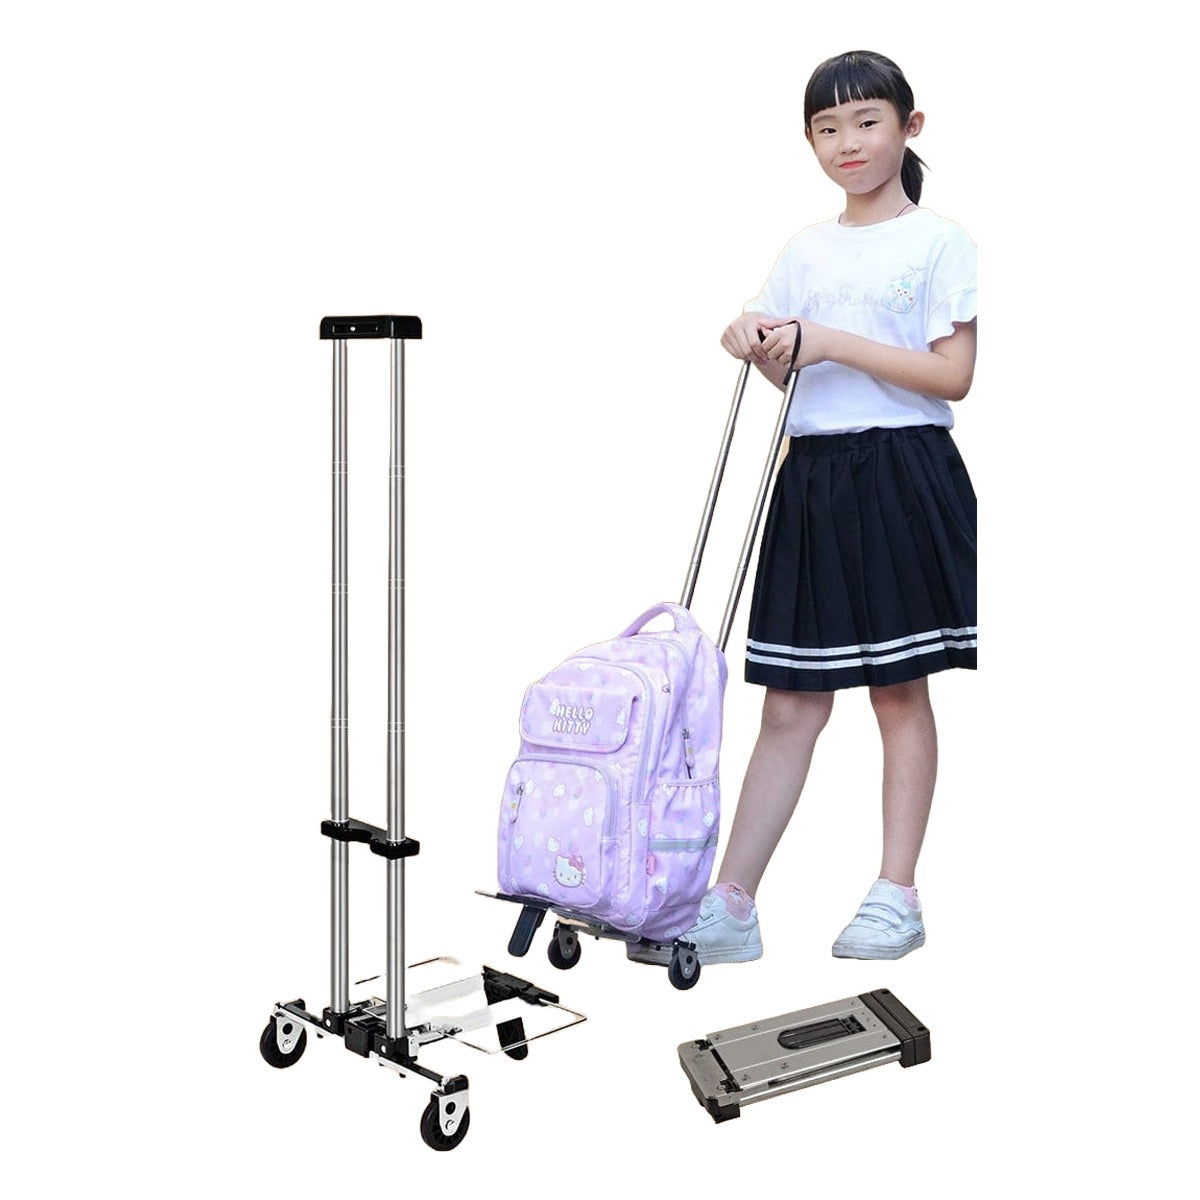 A Girl with Stainless Steel Luggage Carrier.